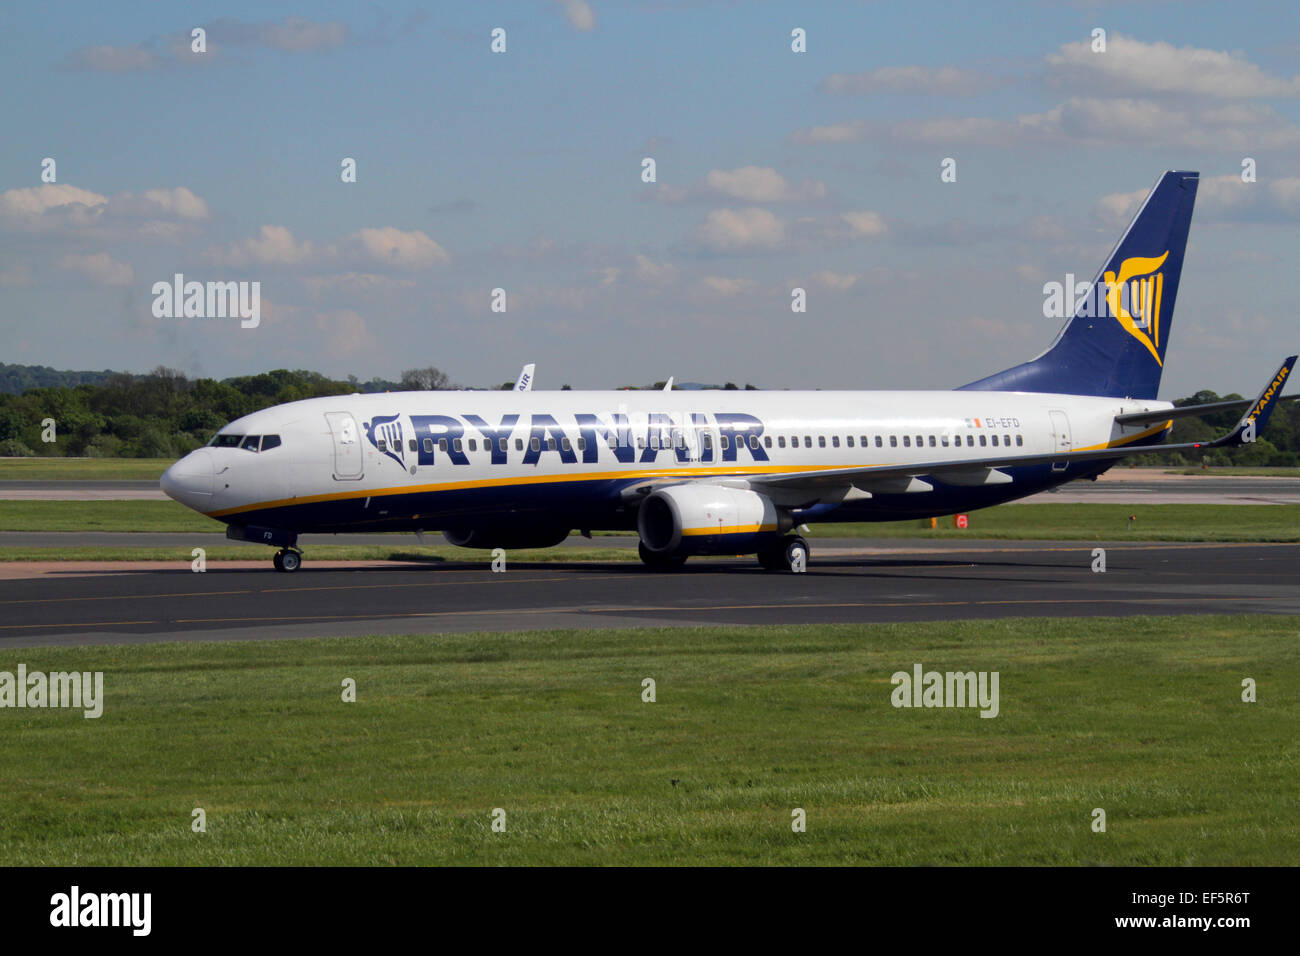 RYAN AIR BOEING 737-8AS AIRCRAFT EI-EFD MANCHESTER AIRPORT ENGLAND 14 May 2014 Stock Photo